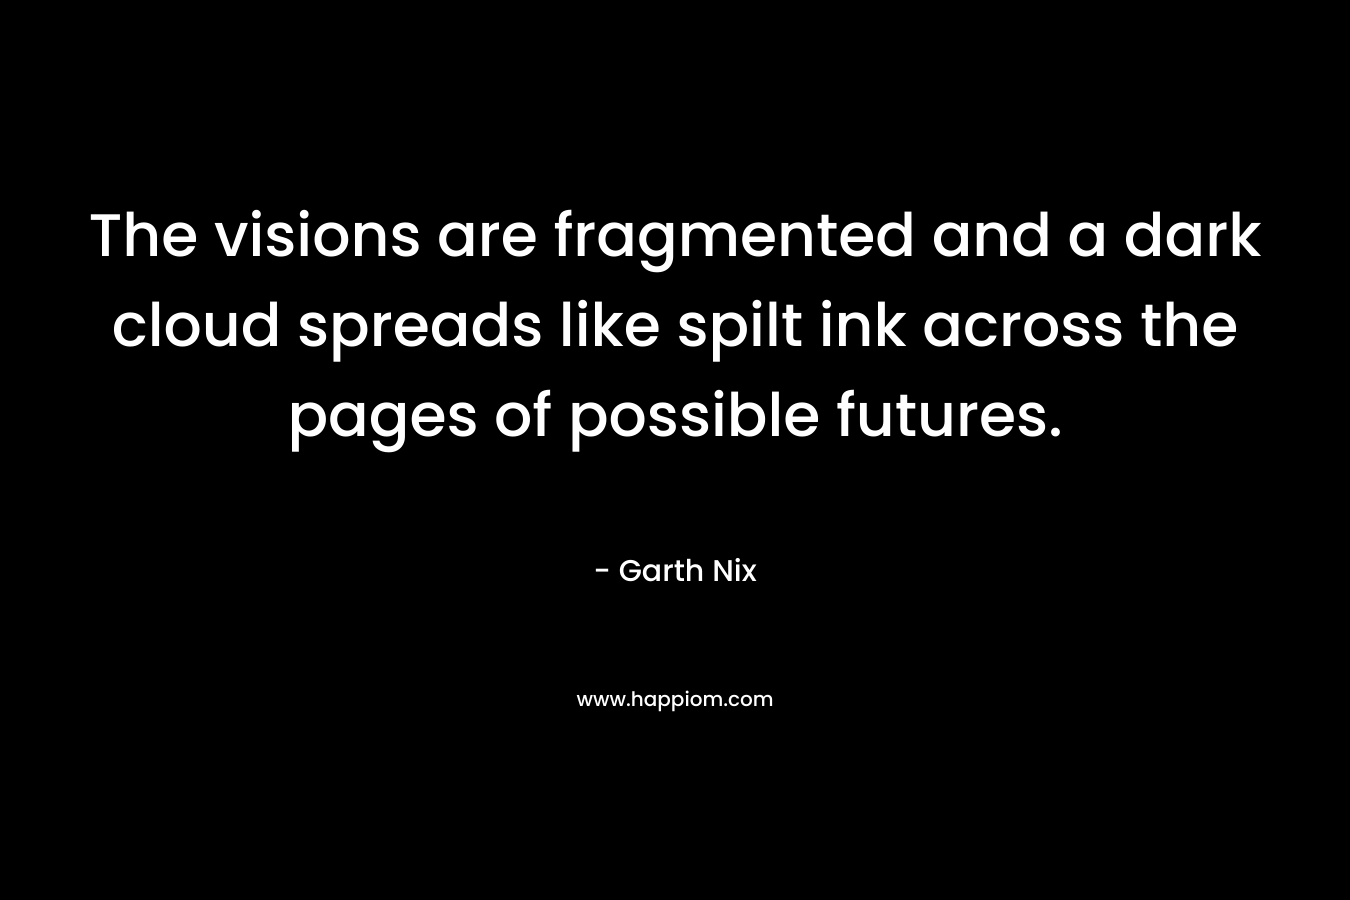 The visions are fragmented and a dark cloud spreads like spilt ink across the pages of possible futures. – Garth Nix